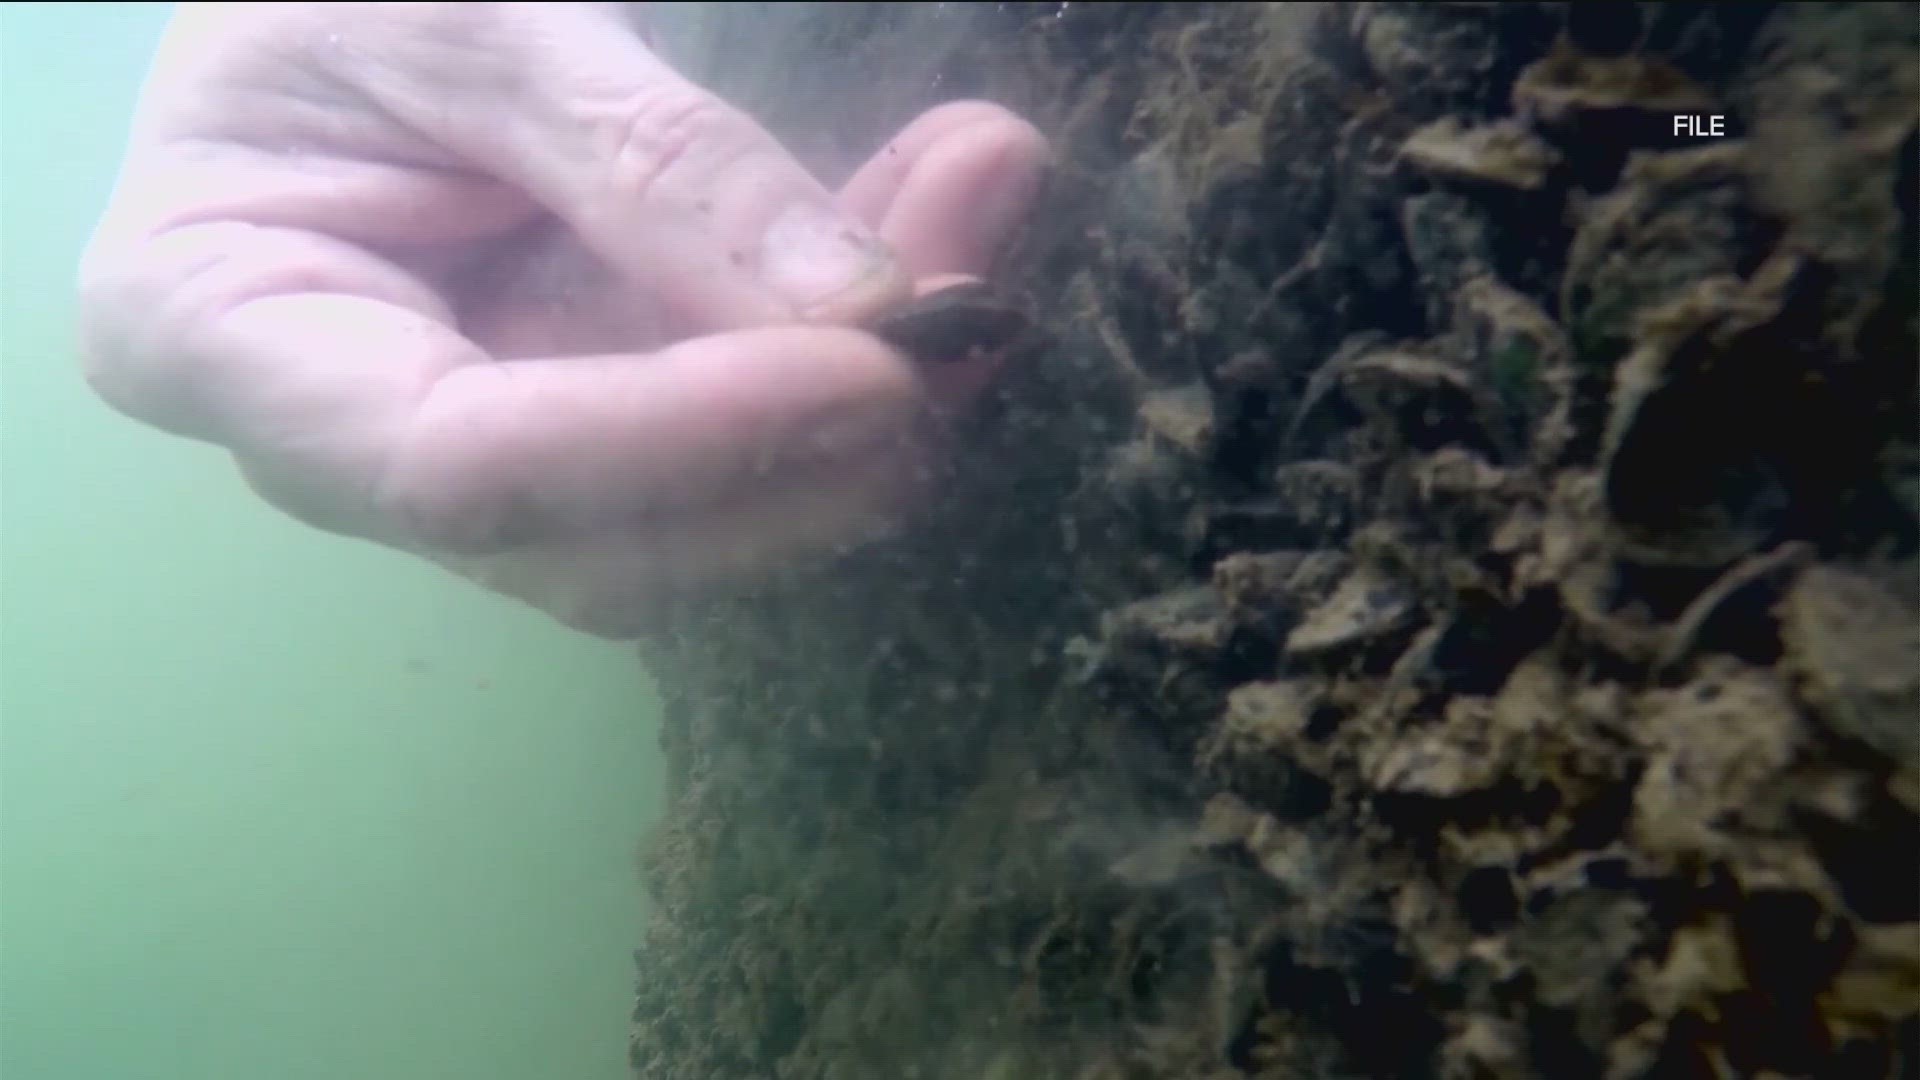 Lake Travis is full of hazards and it's not just the water, but also what lies beneath. KVUE looked at the toll zebra mussels are taking.